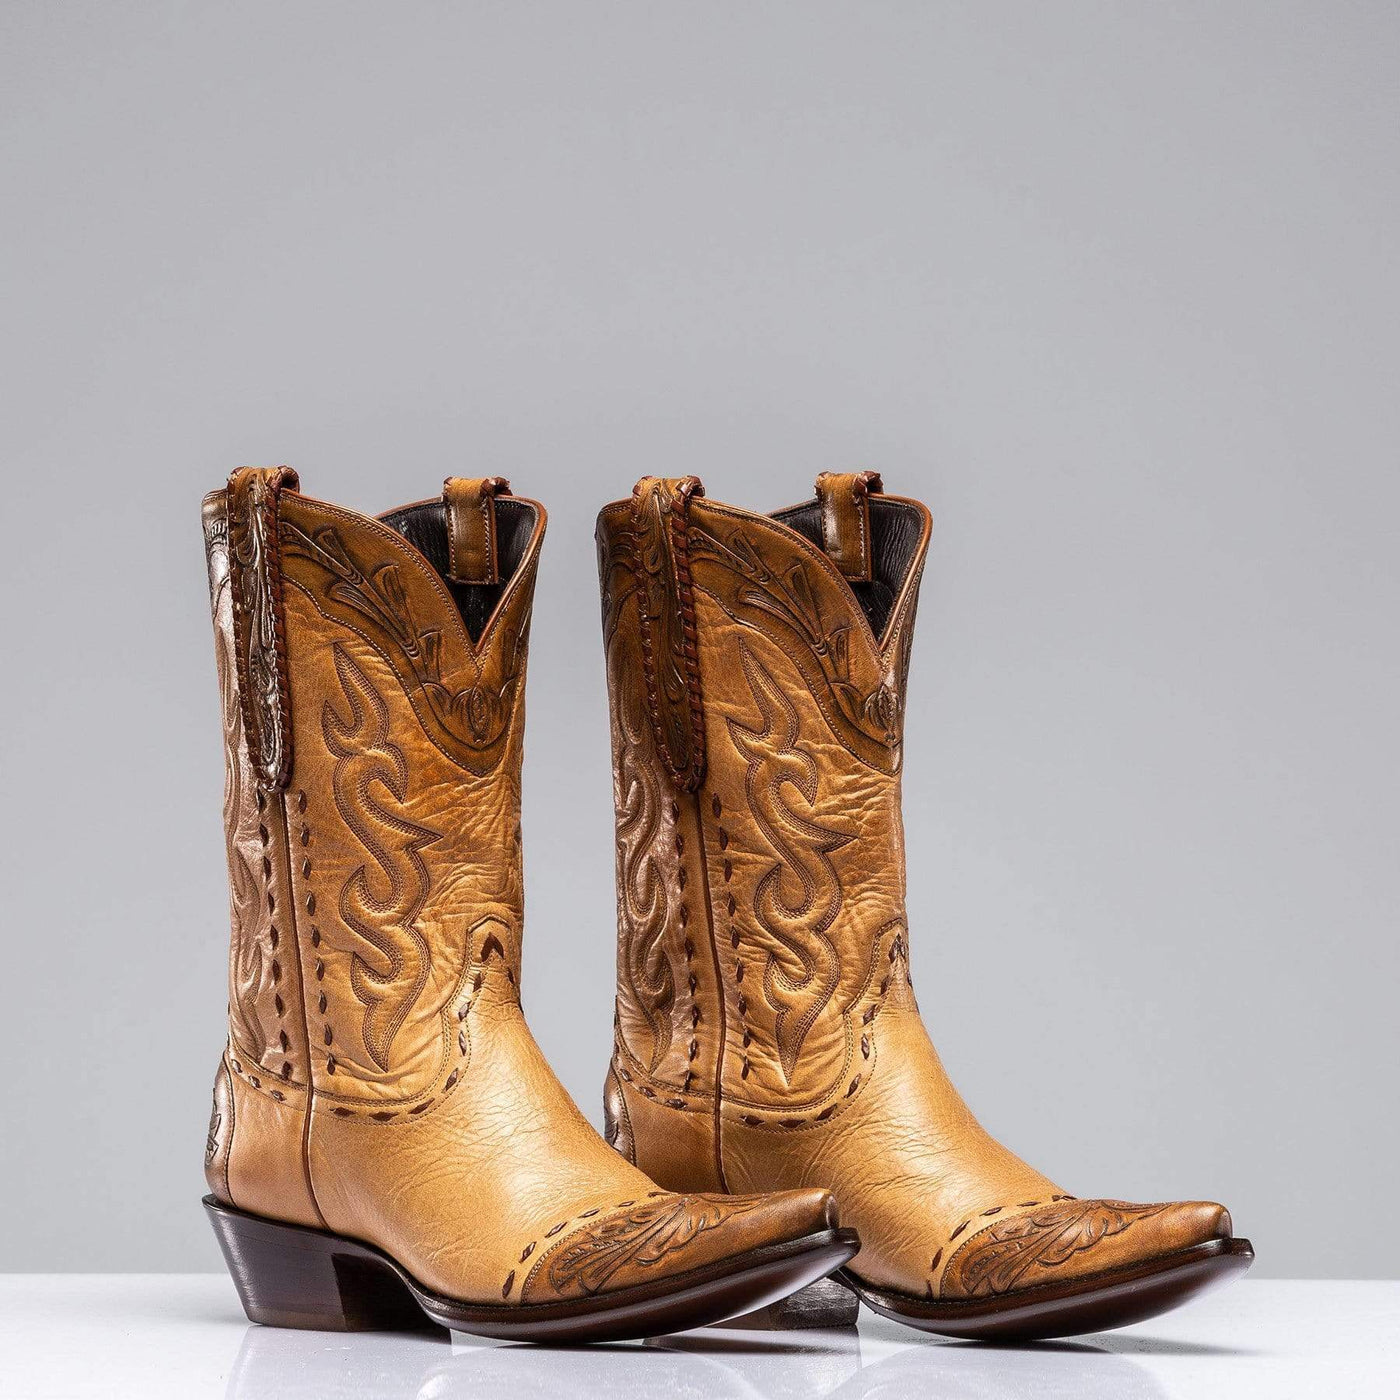 Western Buttercup Boots - AXEL'S